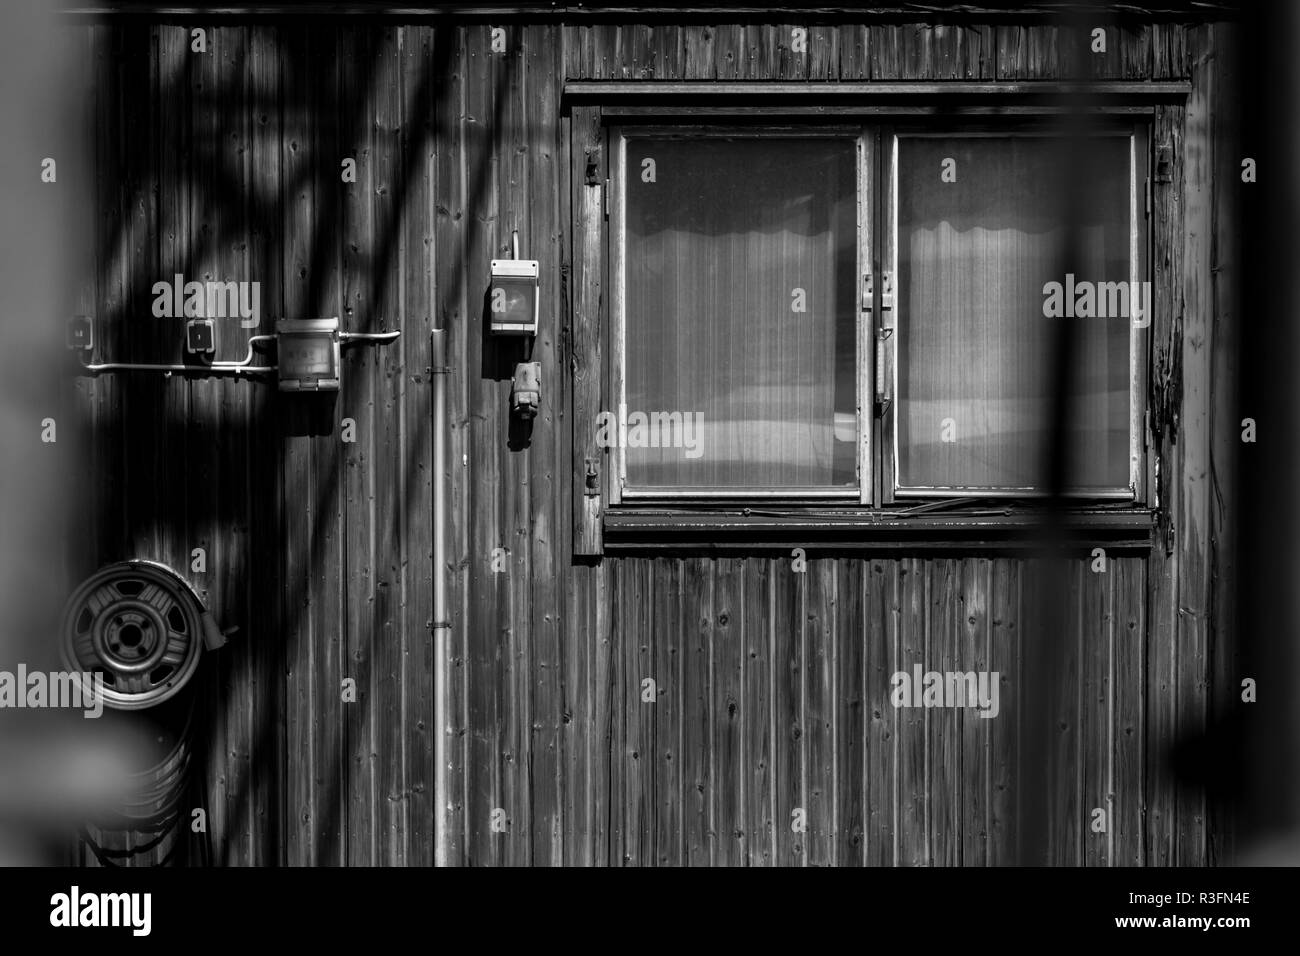 A facade with windows of a small wooden house in black and white, Kil, Sweden Stock Photo